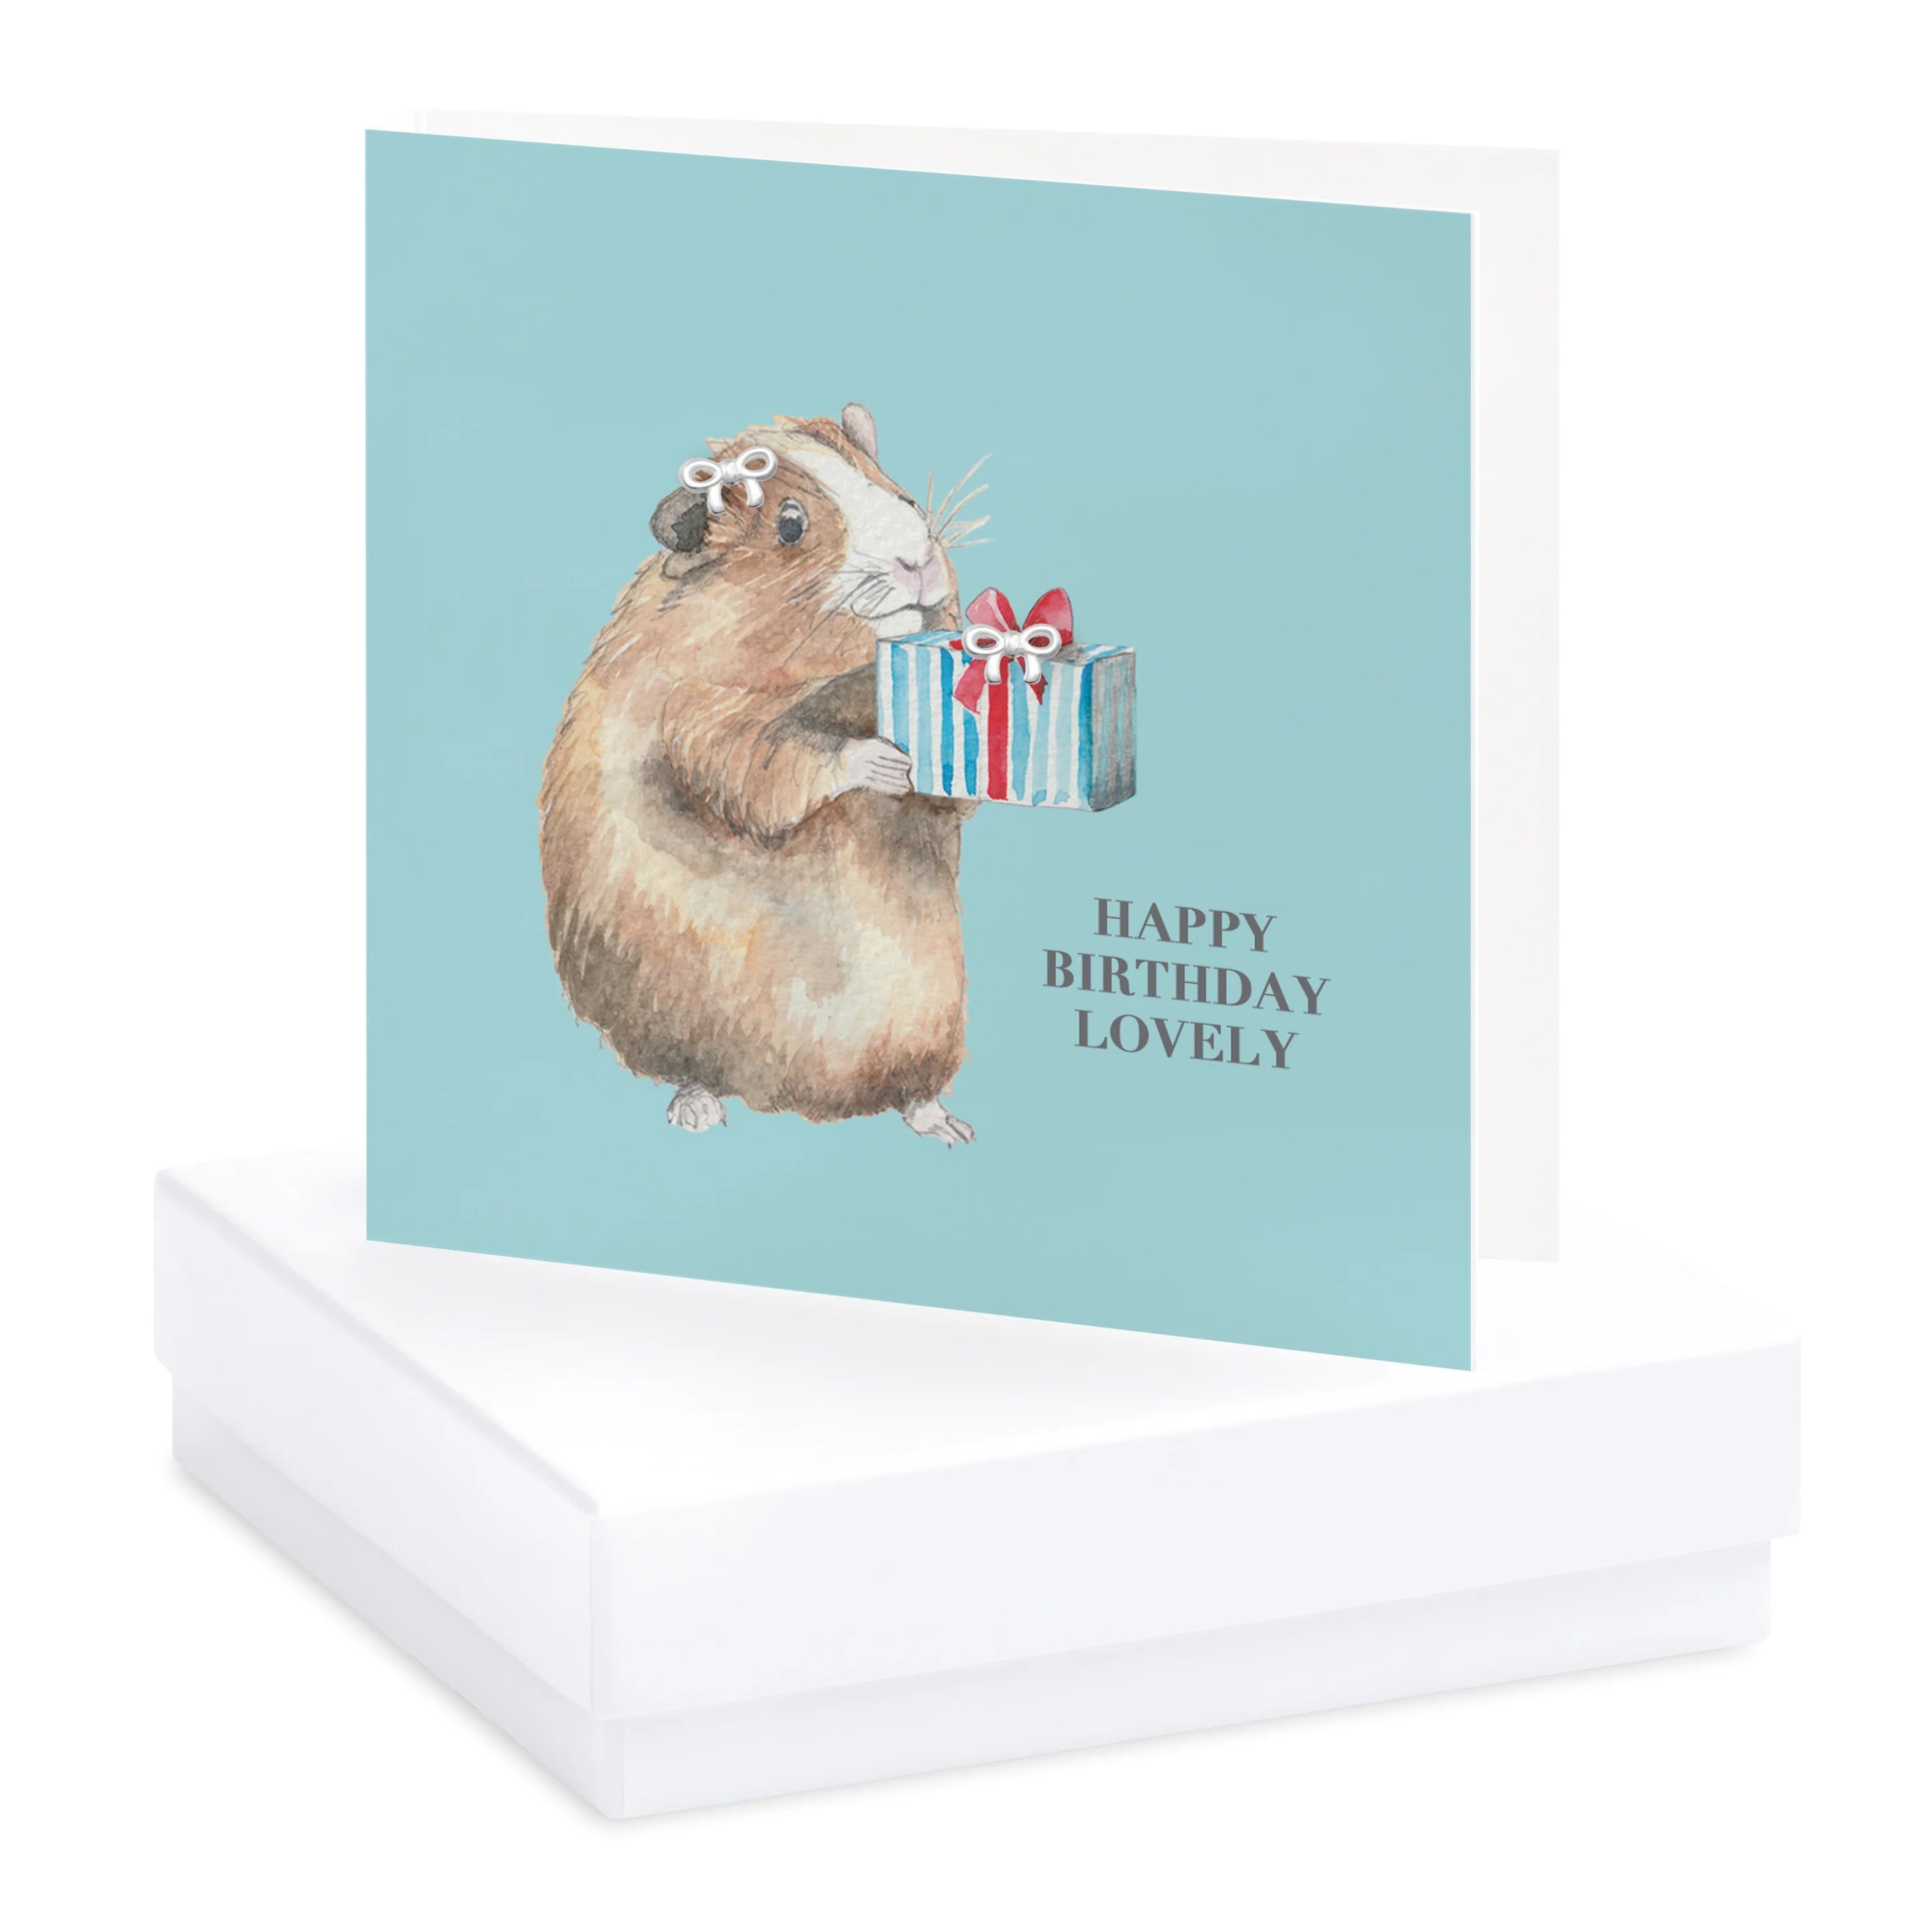 Fabulous Gifts Crumble & Core Box Birthday Guinea Pig Earring Card by Weirs of Baggot Street